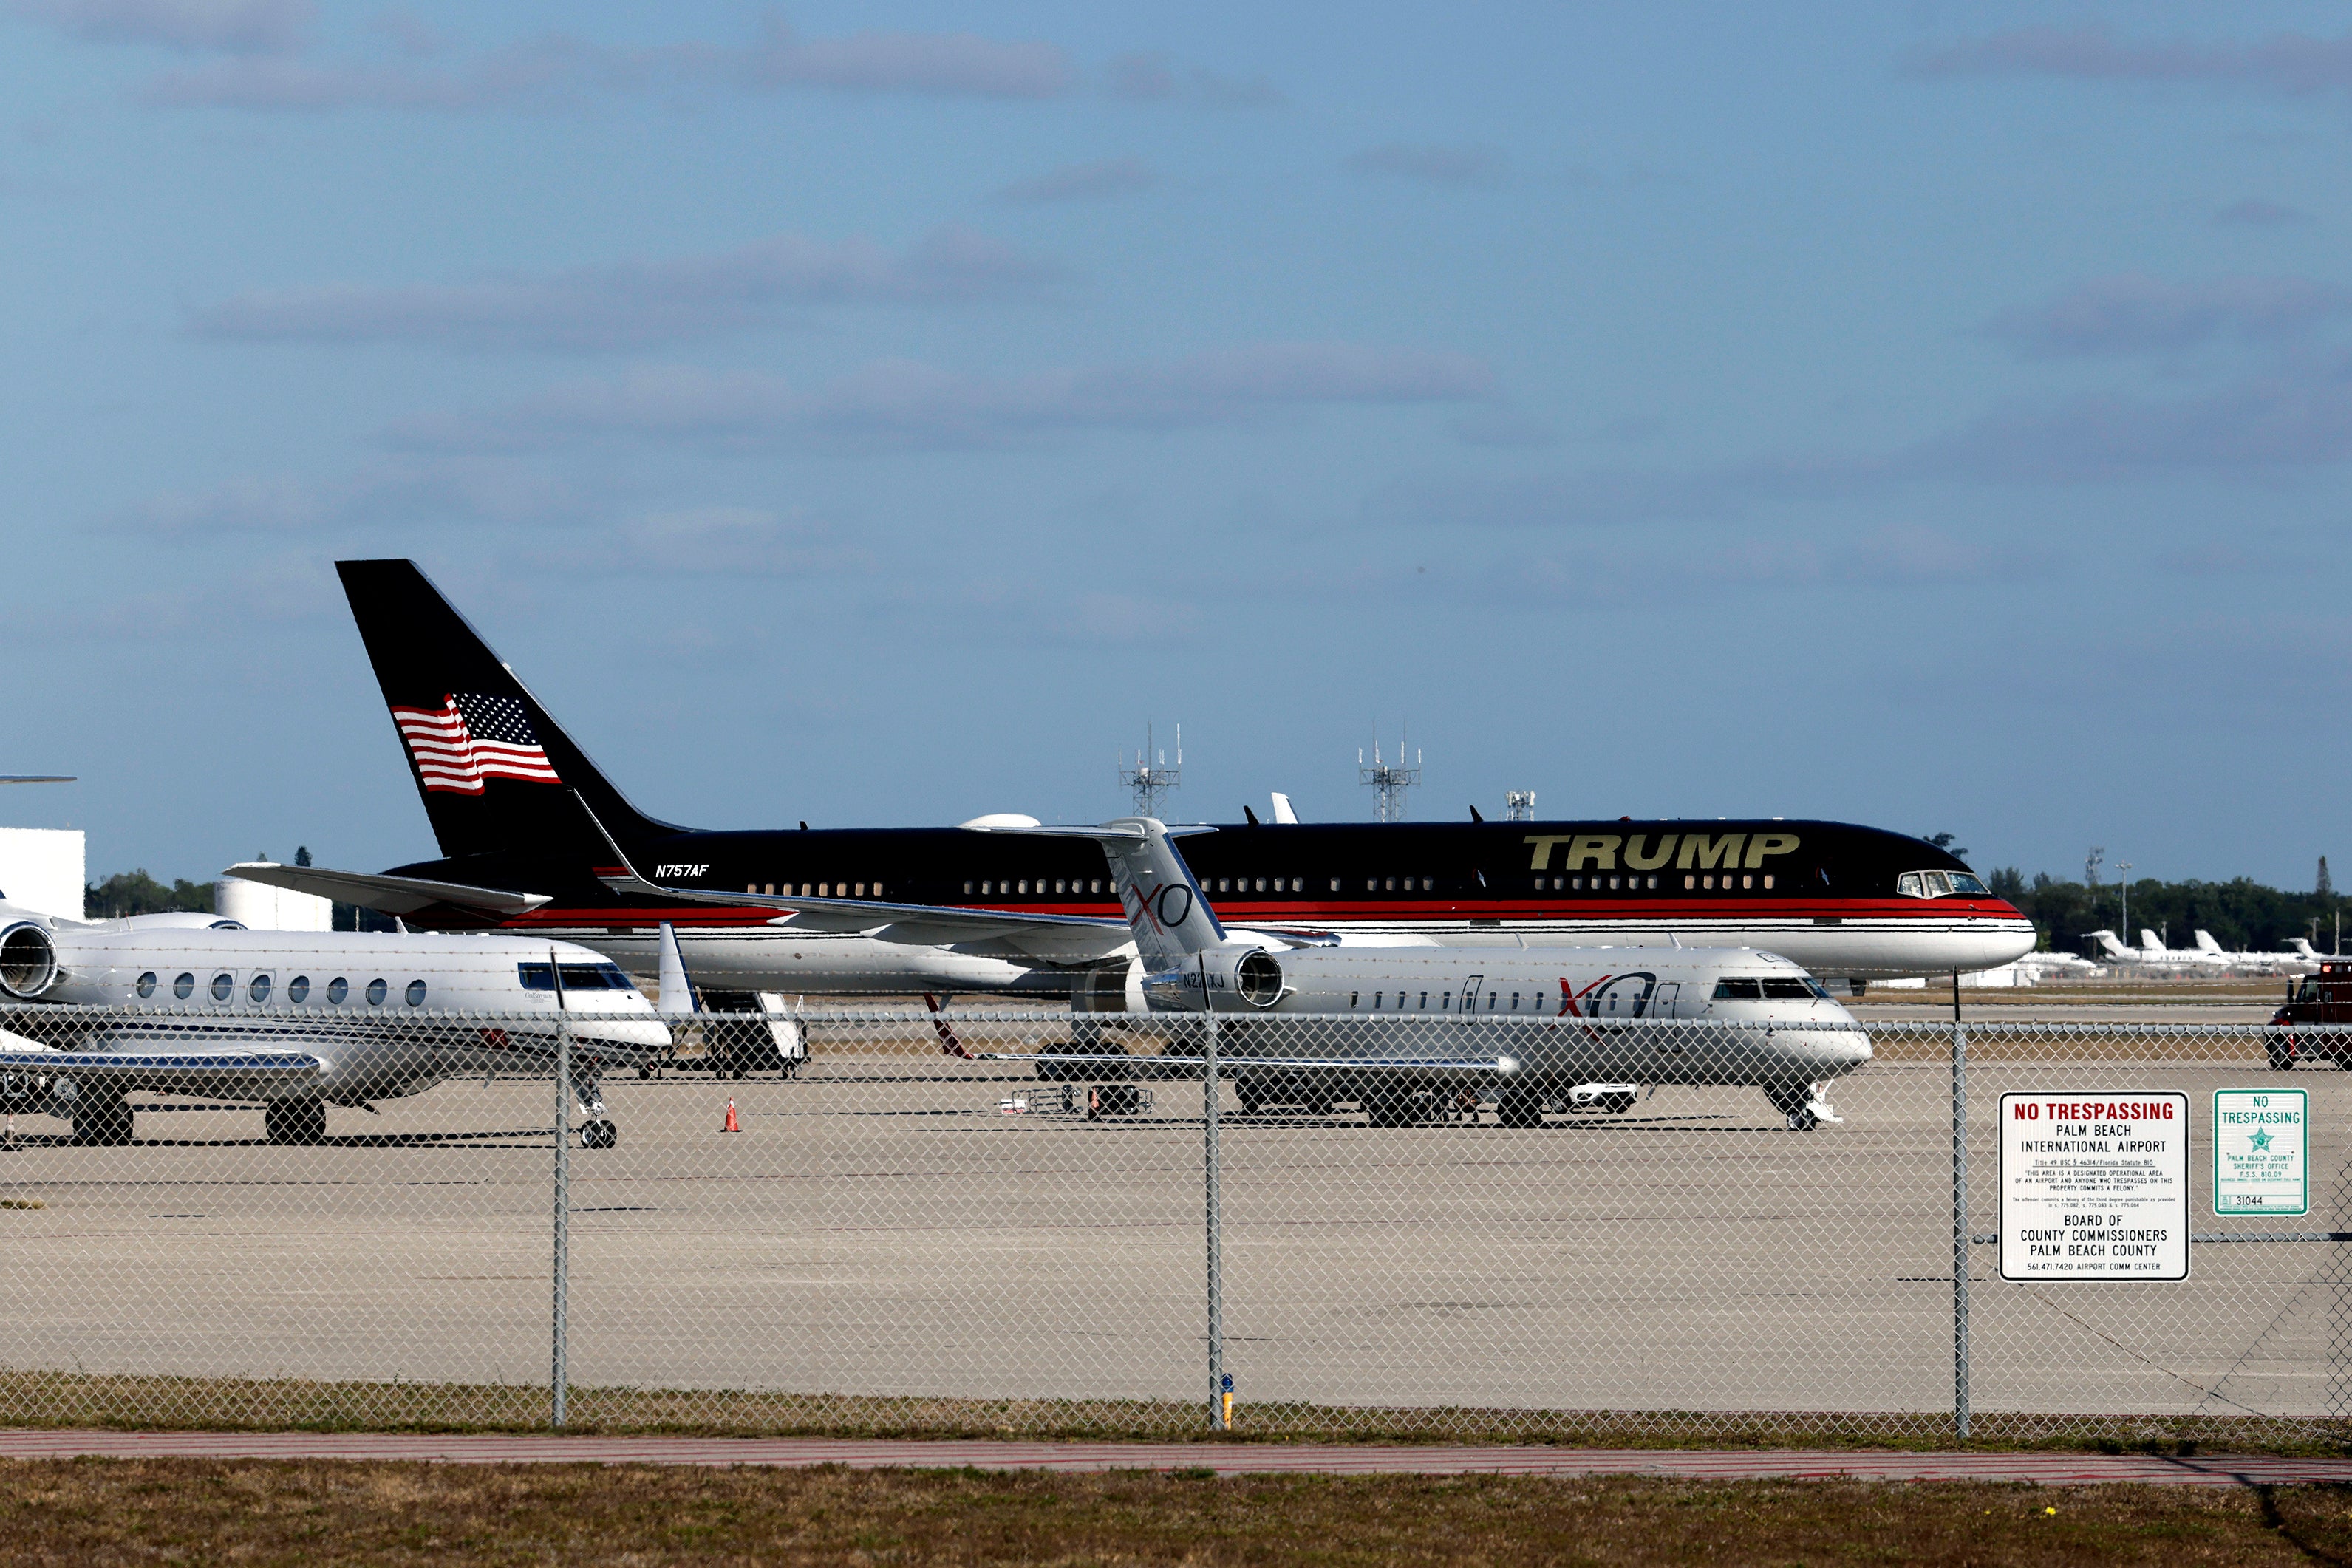 Donald Trump’s Boeing 757, pictured at Palm Beach International Airport, clipped another unoccupied corporate plane while taxiing on Sunday